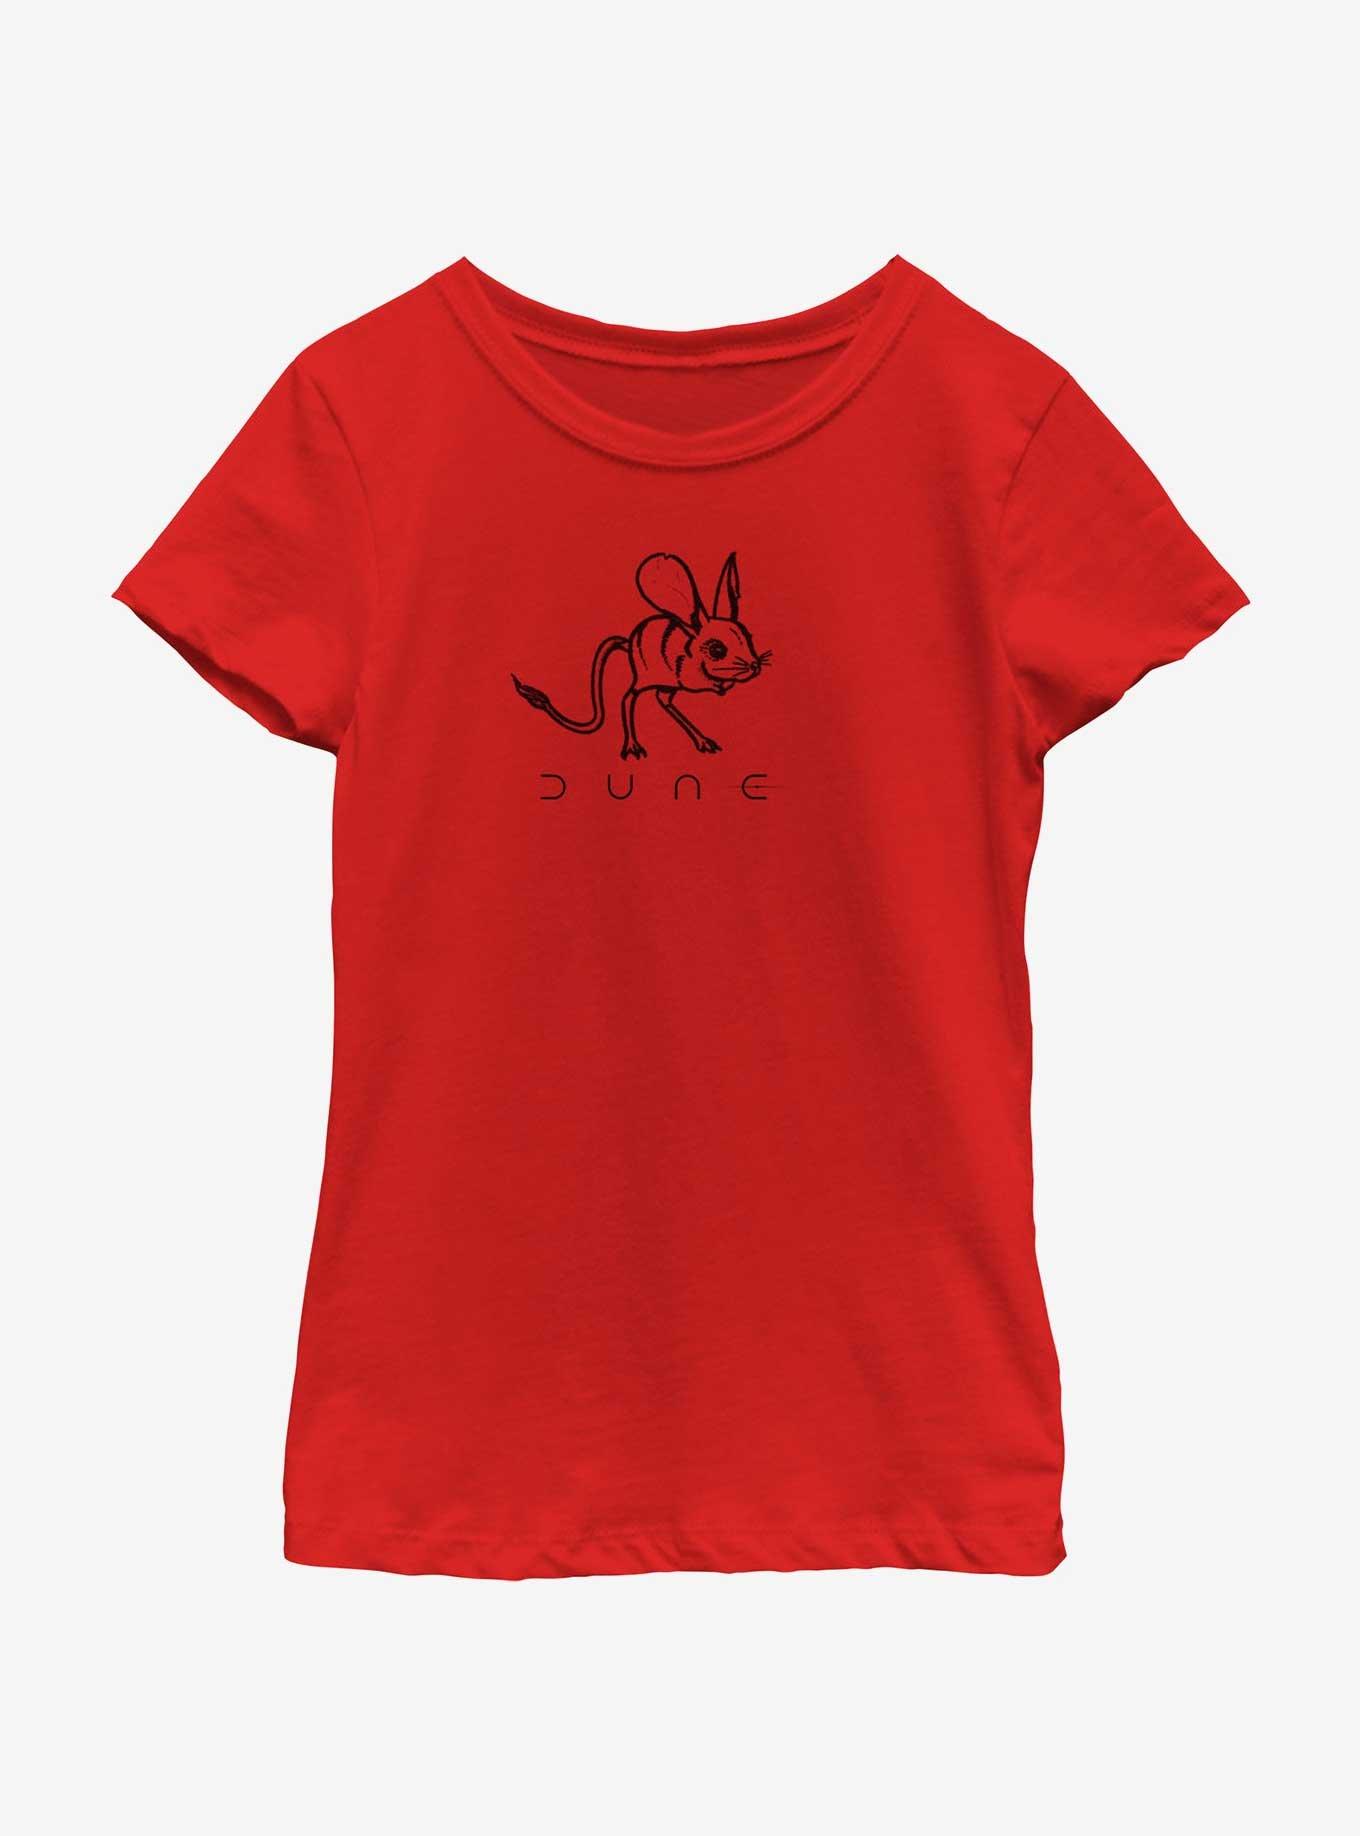 Dune: Part Two Desert Mouse Youth Girls T-Shirt, RED, hi-res